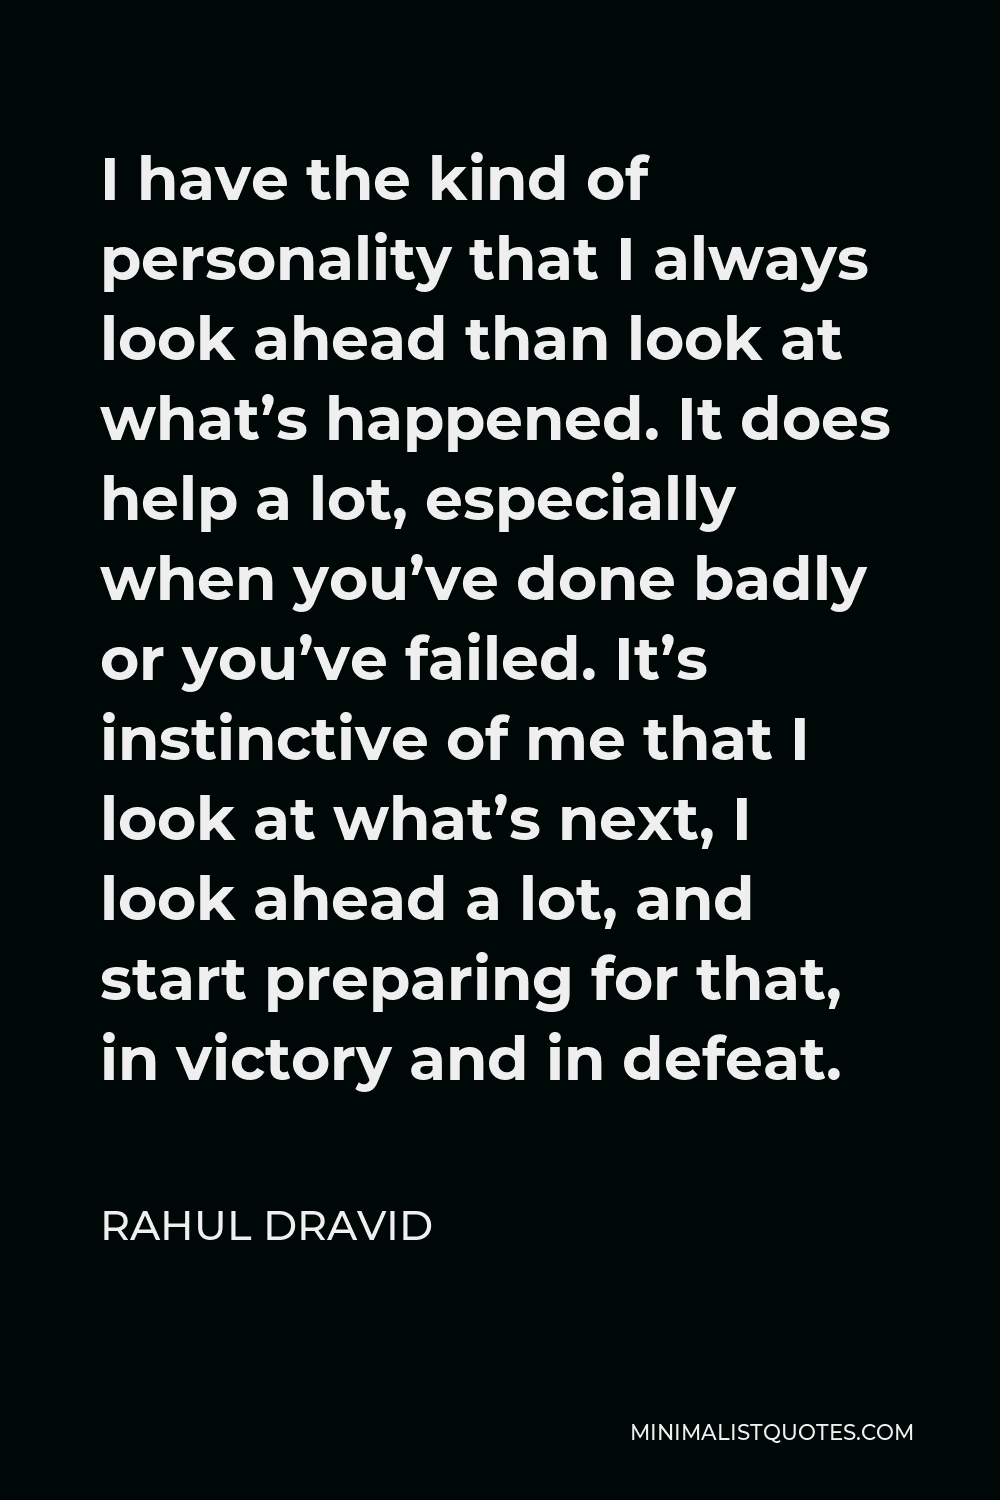 Rahul Dravid Quote - I have the kind of personality that I always look ahead than look at what’s happened. It does help a lot, especially when you’ve done badly or you’ve failed. It’s instinctive of me that I look at what’s next, I look ahead a lot, and start preparing for that, in victory and in defeat.